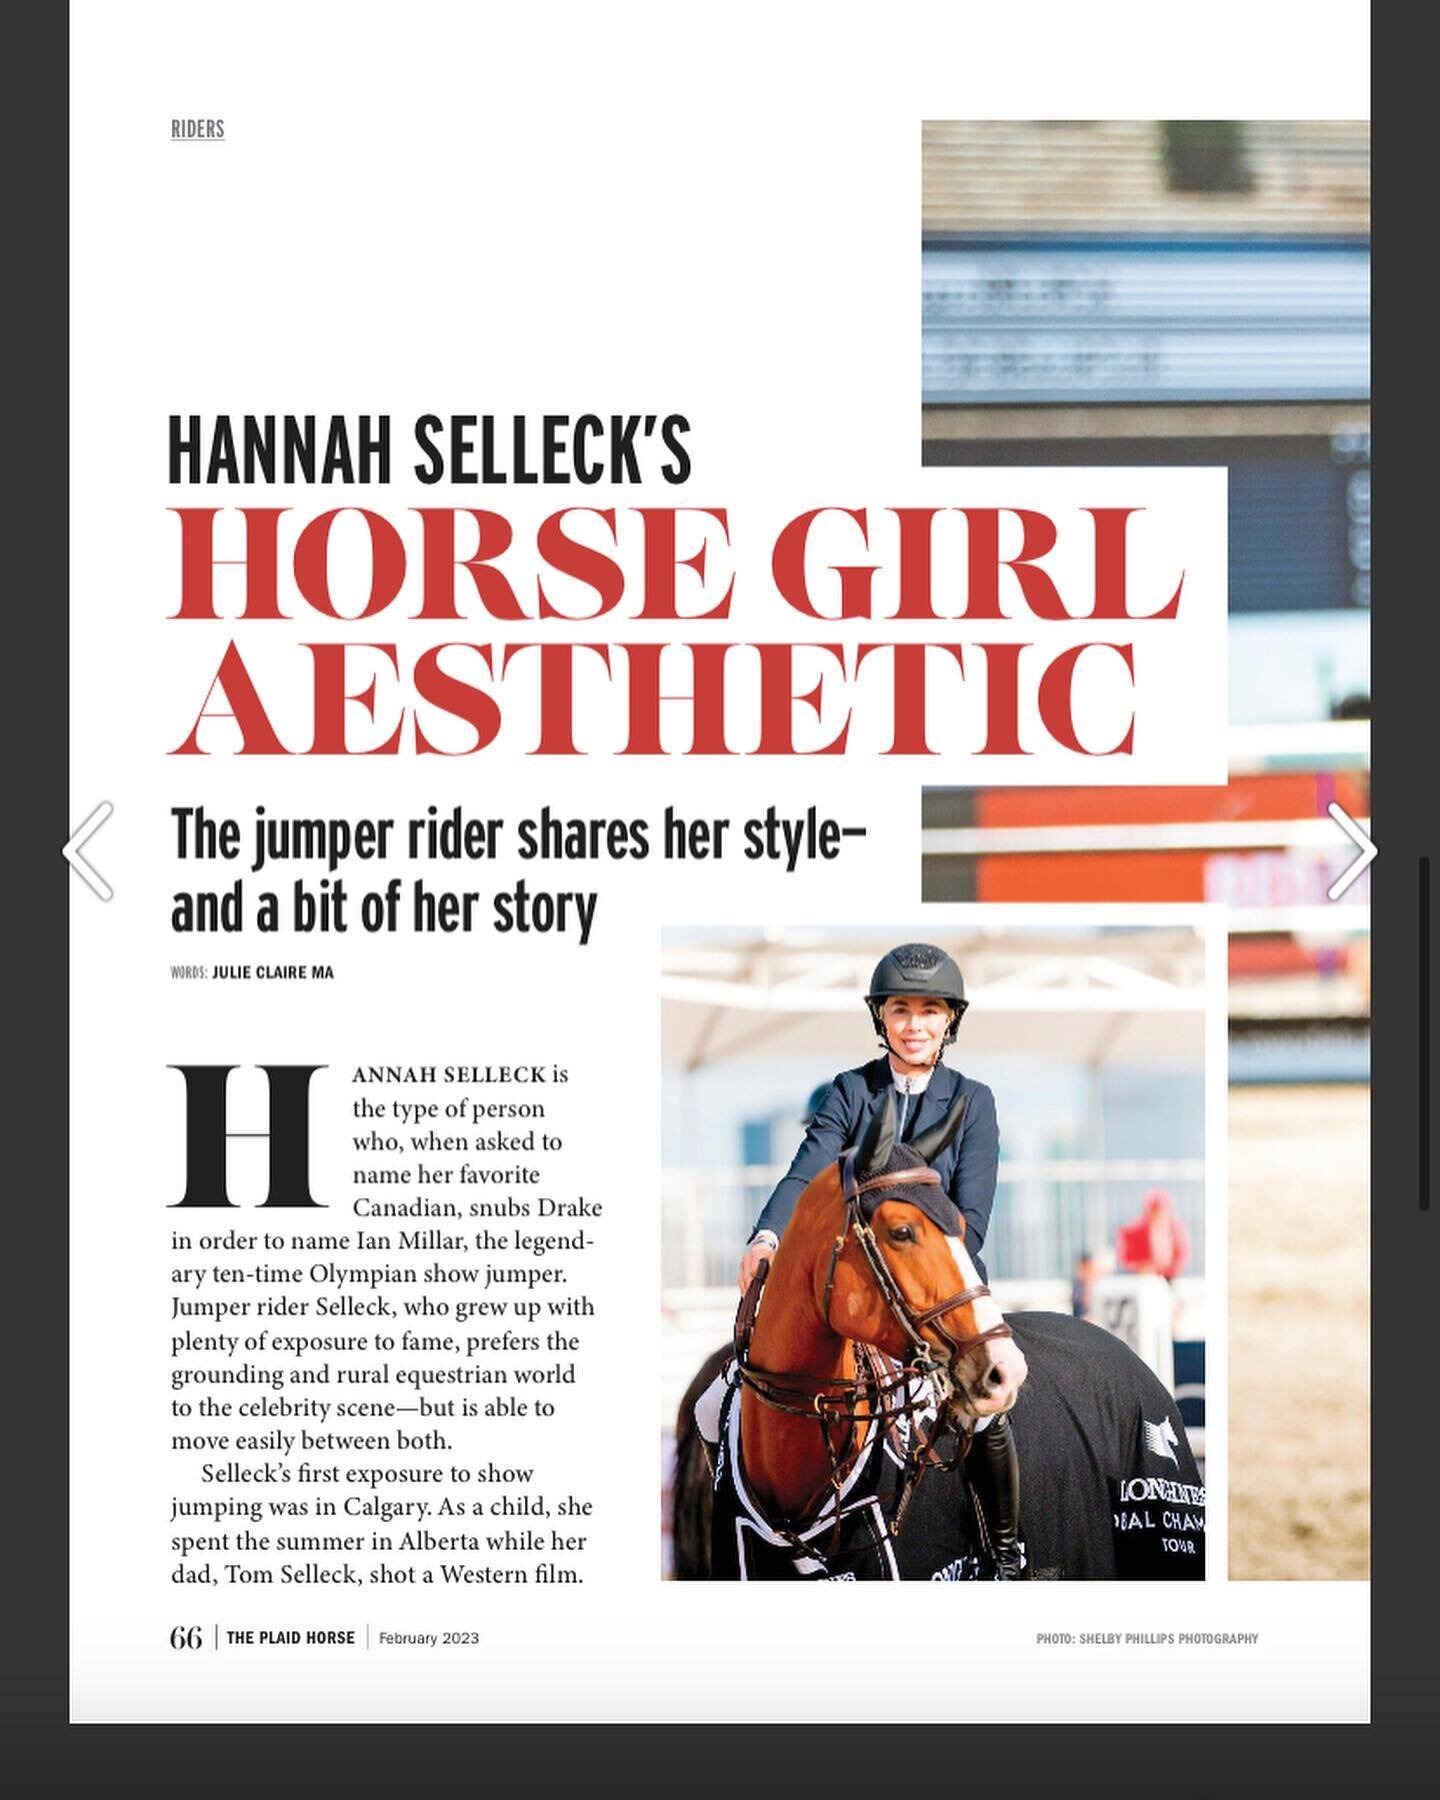 Hannah Selleck is one of the most glamorous people I&rsquo;ve met, and she graciously shared her style tips with us. Thanks @hannahselleck - you were a delight!

Read the article on page 66 of the Plaid Horse Magazine. Link in bio. 

#style #equestri